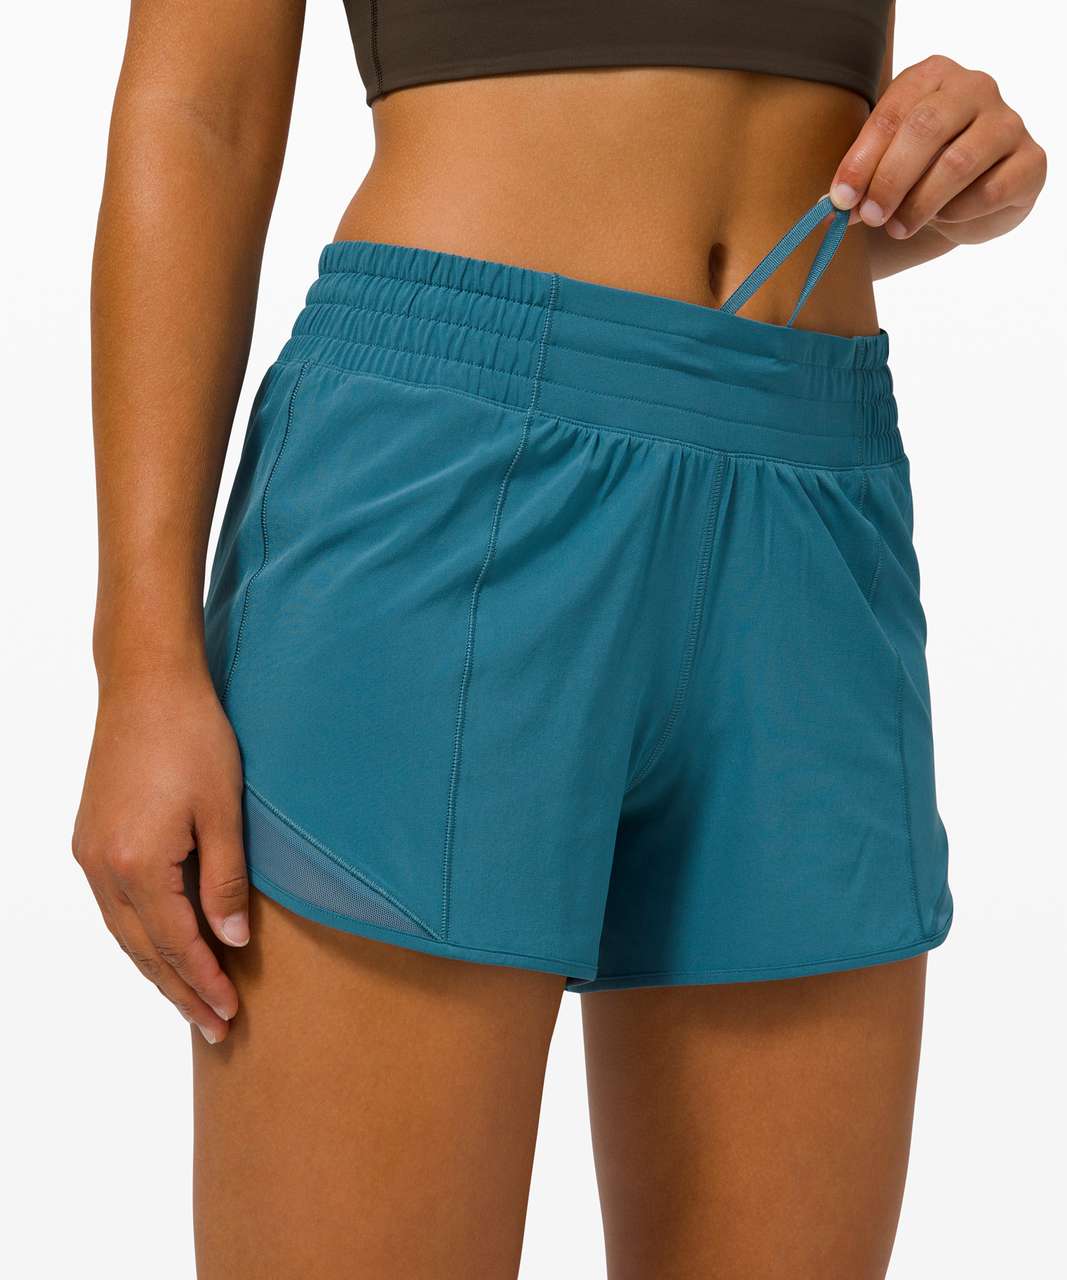 Lululemon Hotty Hot High Rise Shorts Electric Turquoise Nwt 10 Blue - $98  New With Tags - From Marie